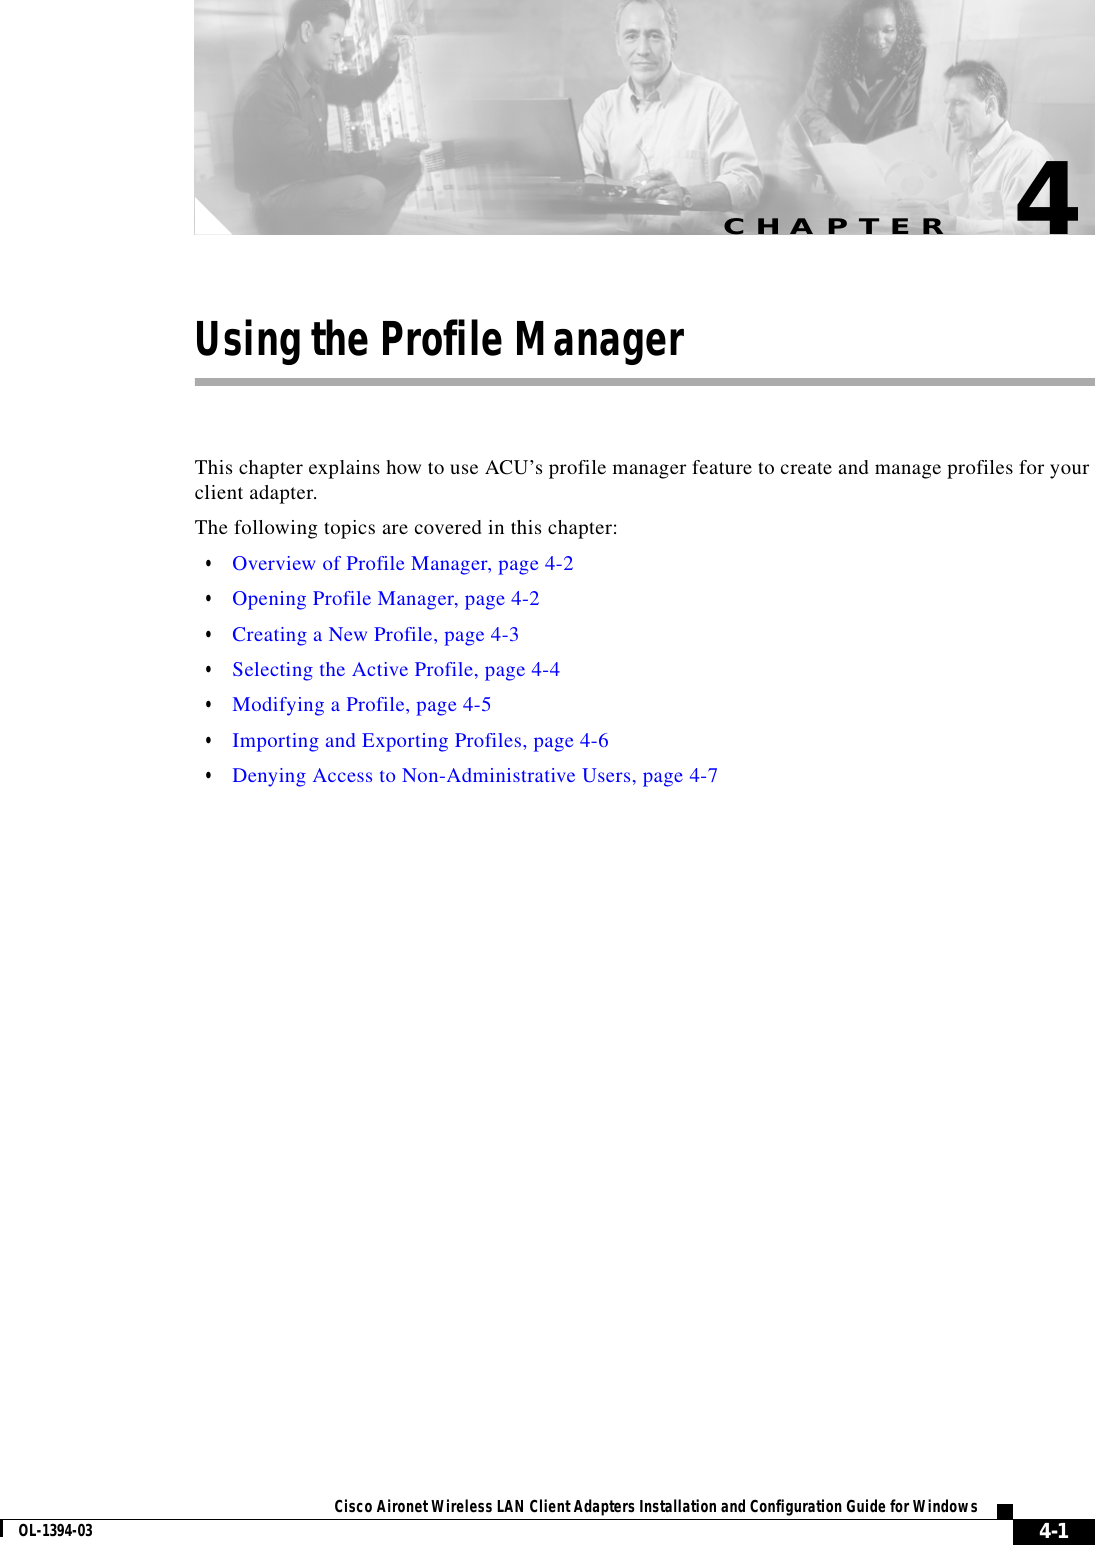 CHAPTER4-1Cisco Aironet Wireless LAN Client Adapters Installation and Configuration Guide for WindowsOL-1394-034Using the Profile ManagerThis chapter explains how to use ACU’s profile manager feature to create and manage profiles for your client adapter.The following topics are covered in this chapter:•Overview of Profile Manager, page 4-2•Opening Profile Manager, page 4-2•Creating a New Profile, page 4-3•Selecting the Active Profile, page 4-4•Modifying a Profile, page 4-5•Importing and Exporting Profiles, page 4-6•Denying Access to Non-Administrative Users, page 4-7